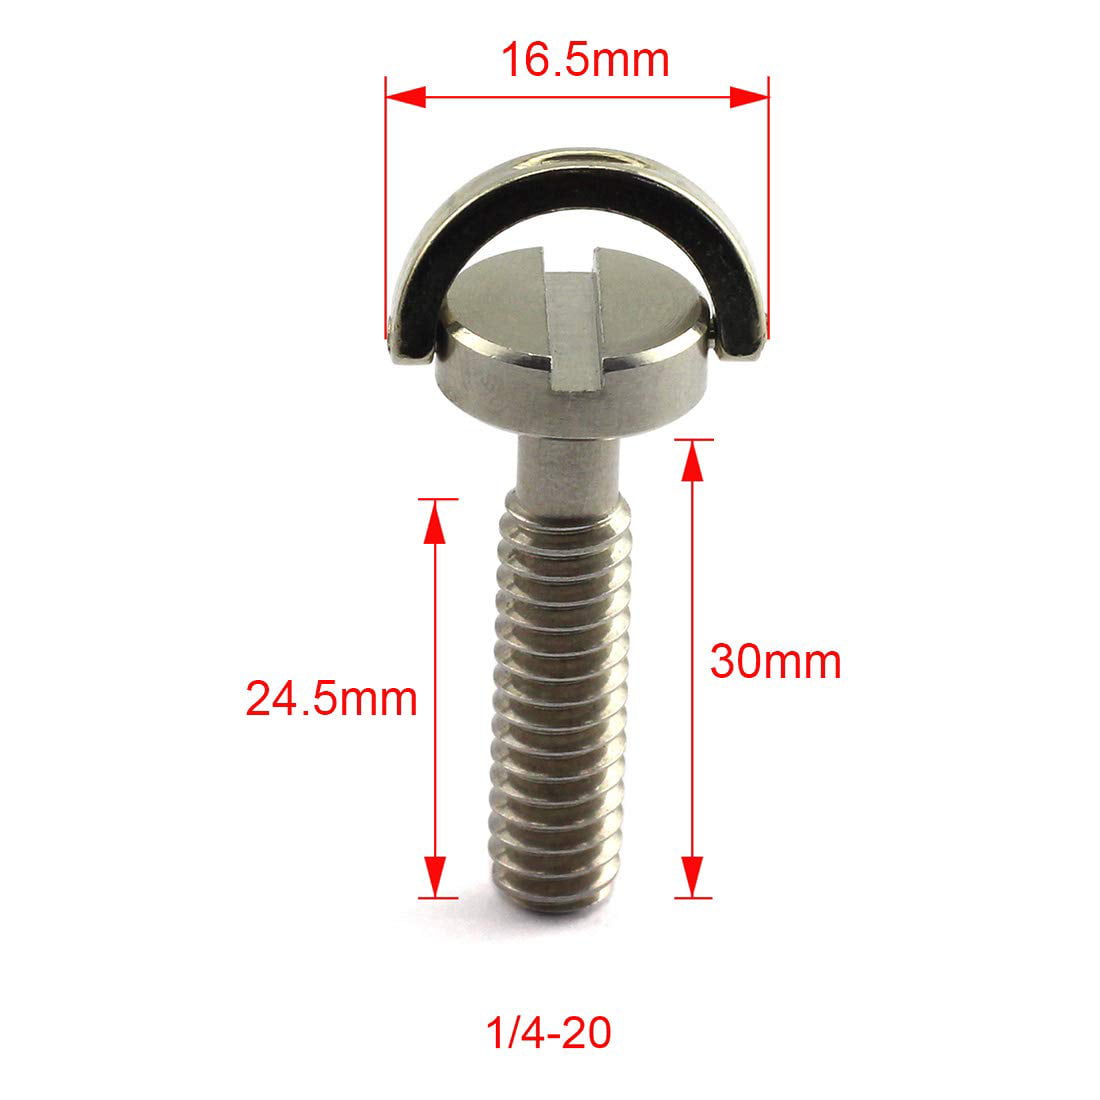 Camera Screw 1/4-Inch Camera Mounting Screw Standard 1/4-20 Male Threaded Tripod Screw D-Ring Stainless Steel Camera Fixing Screws for Camera Tripod Monopod Quick Release Plate Etc Camera Accessory